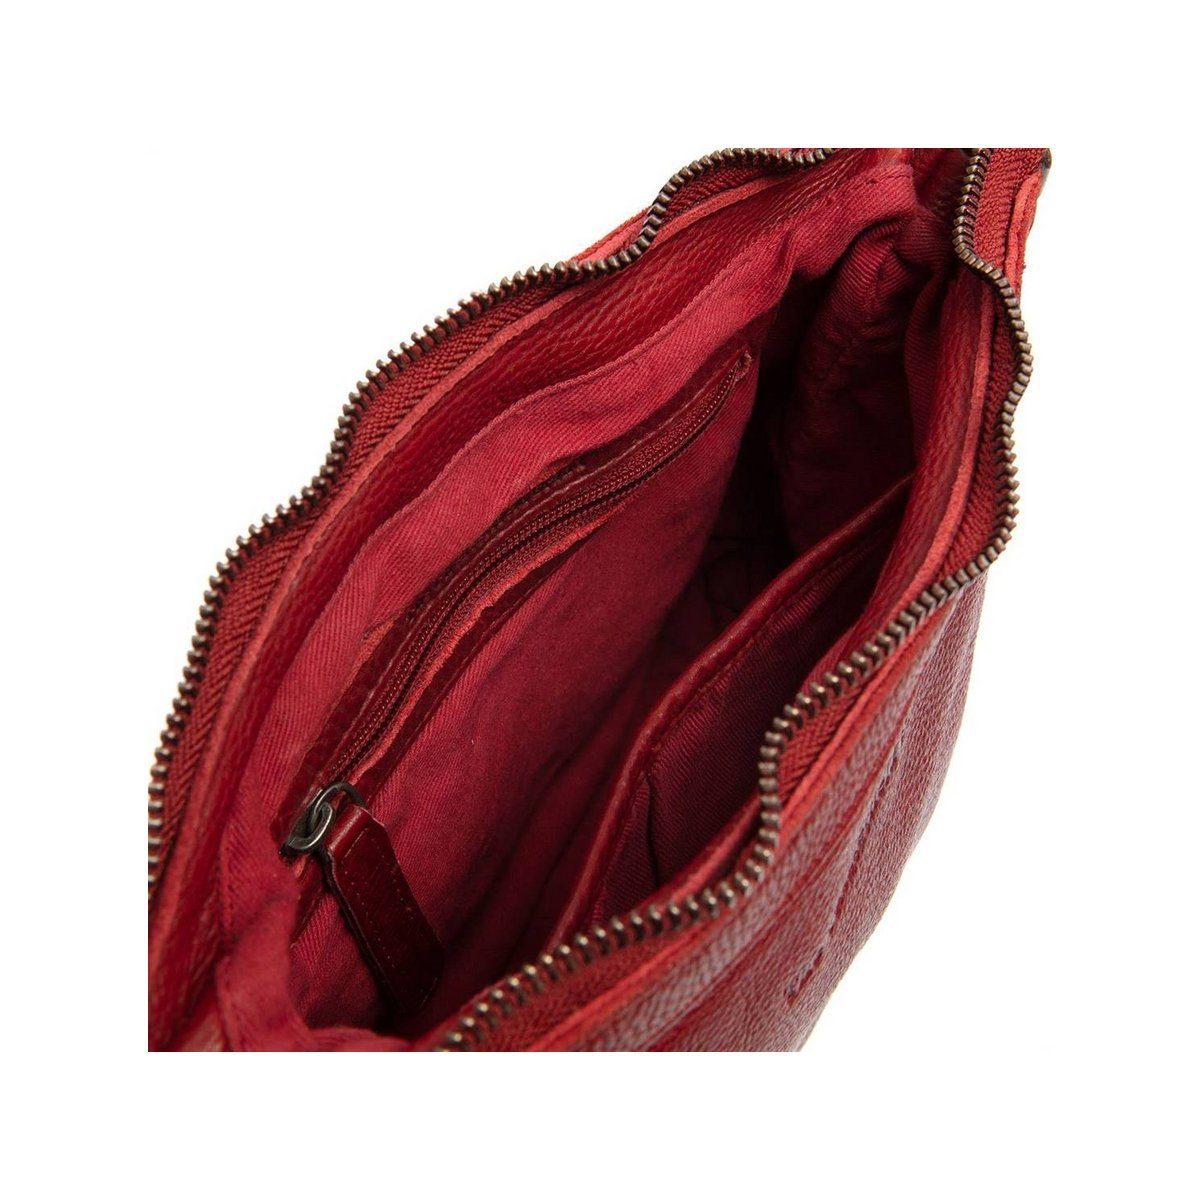 (1-tlg) Red The Chesterfield rot Brand Handtasche